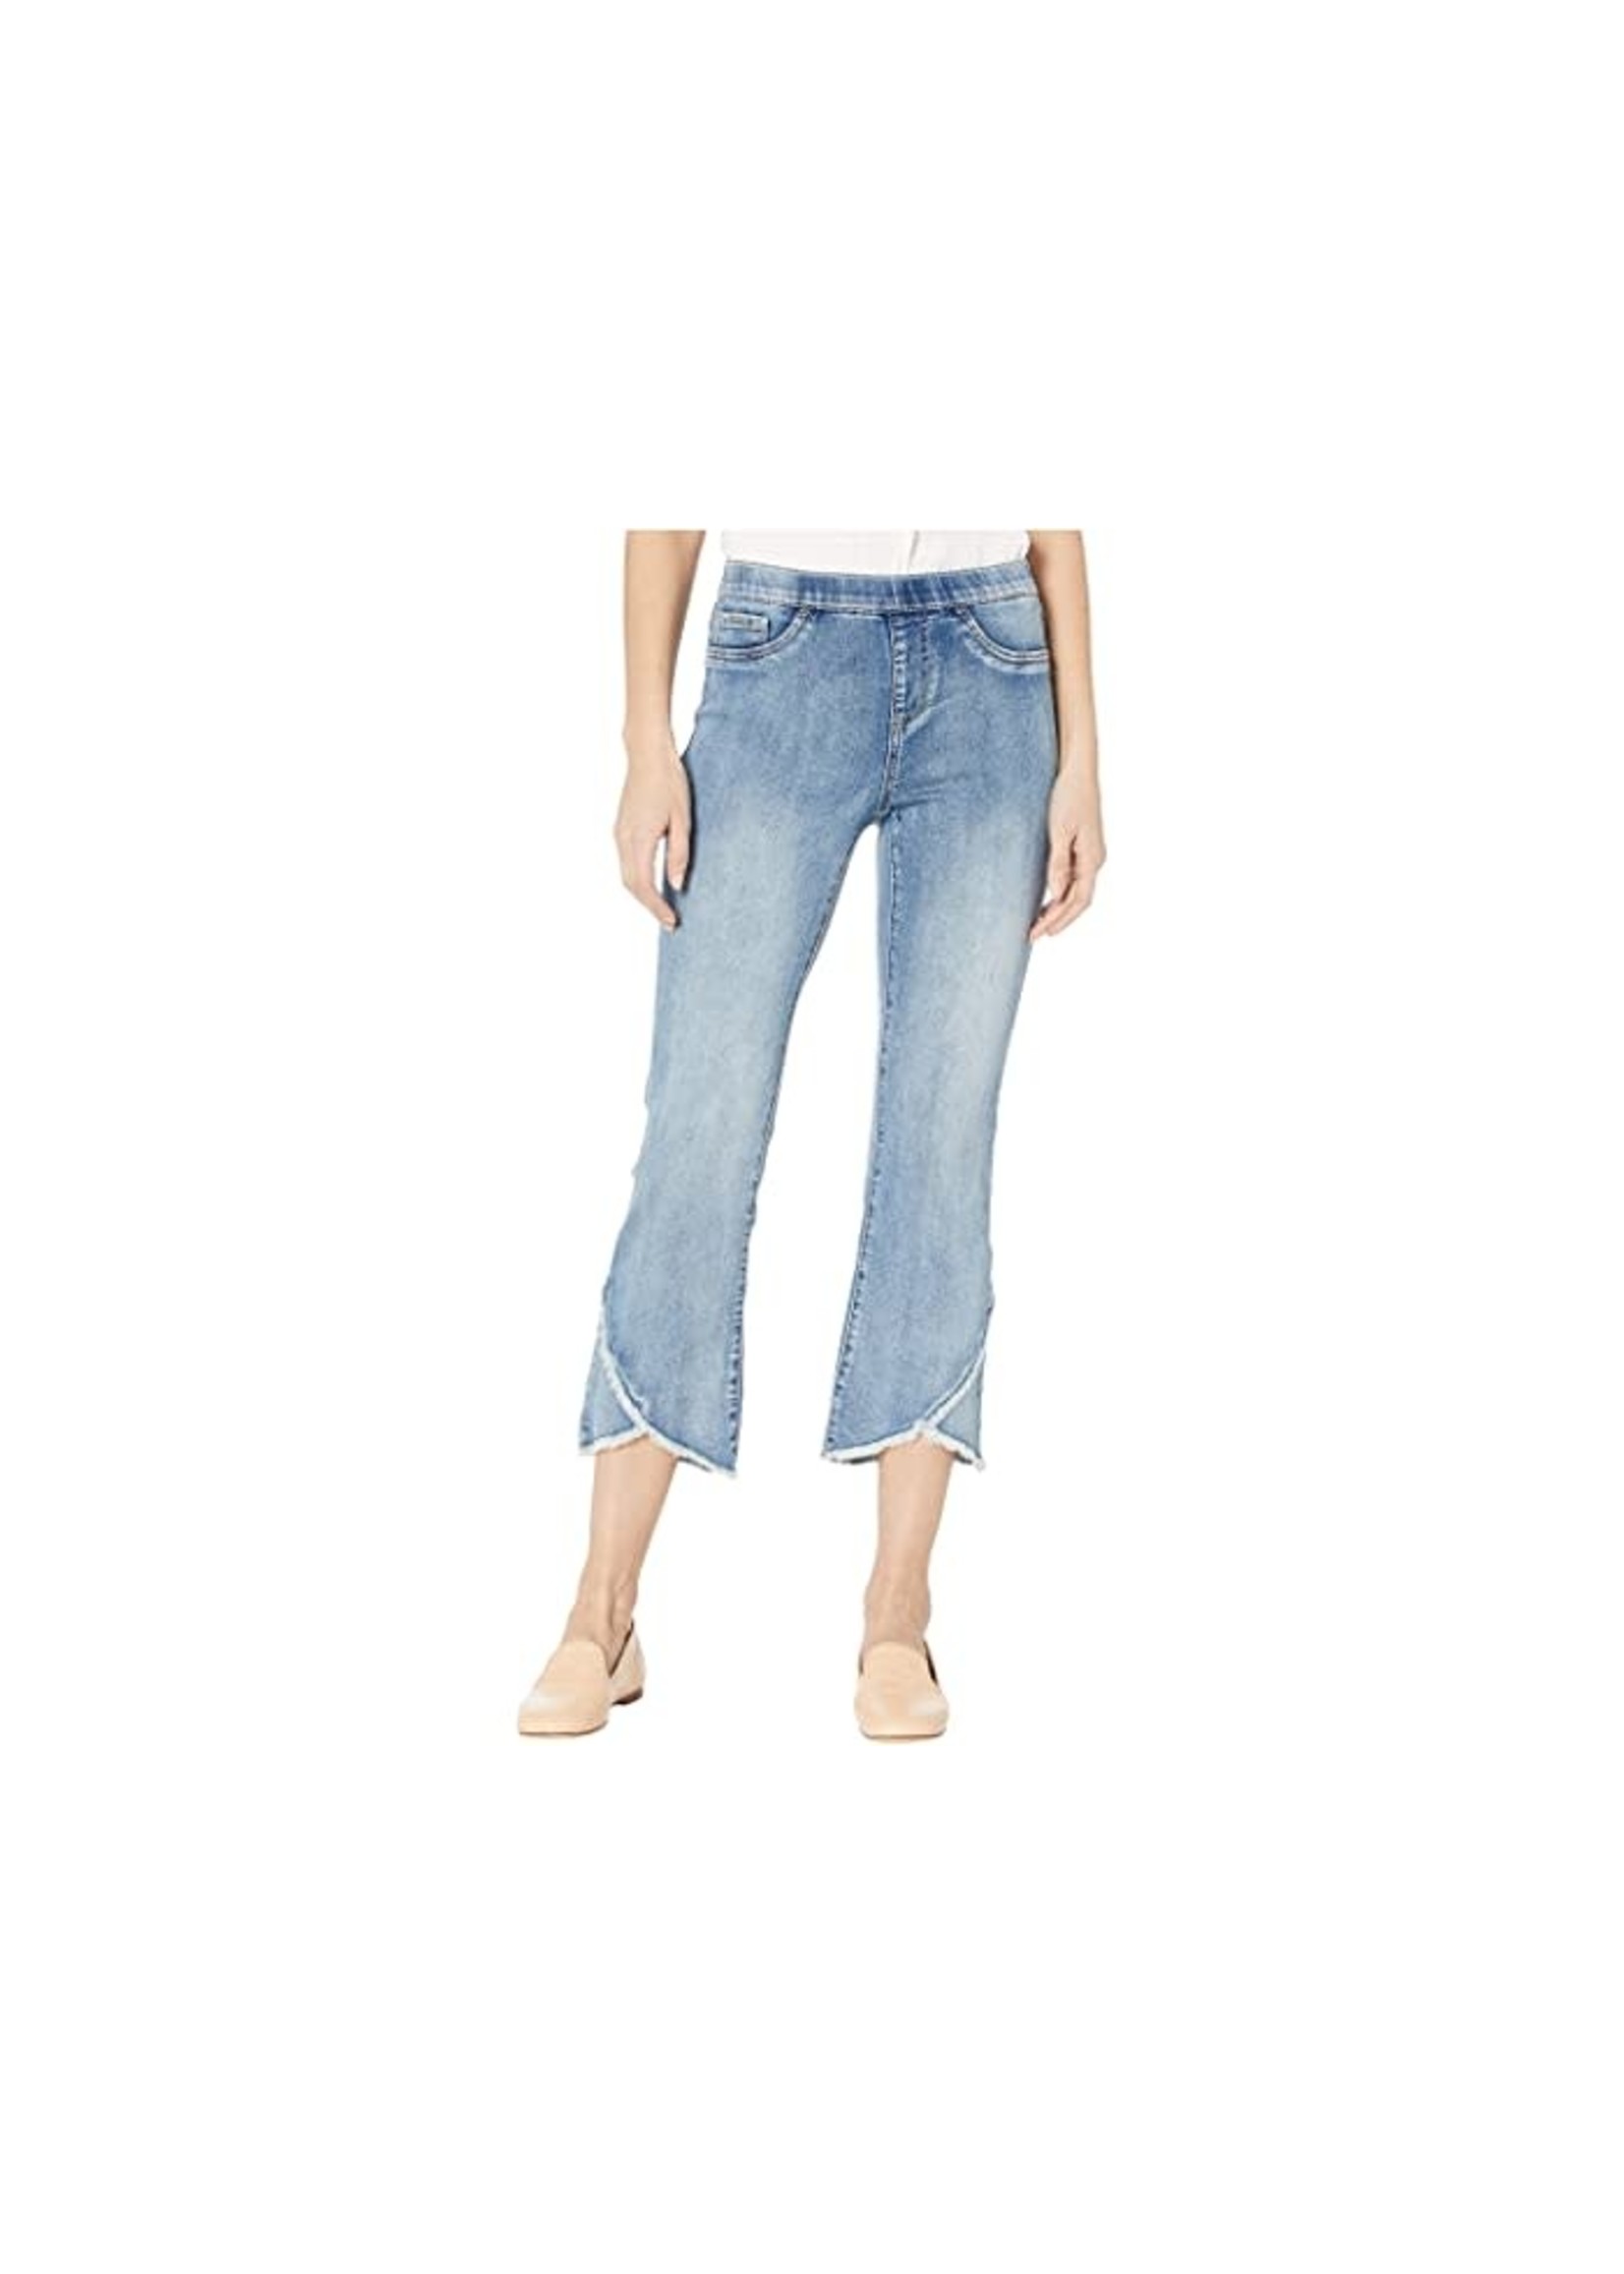 French Dressing Jeans Pull On Flare Crop Pant With Fringe